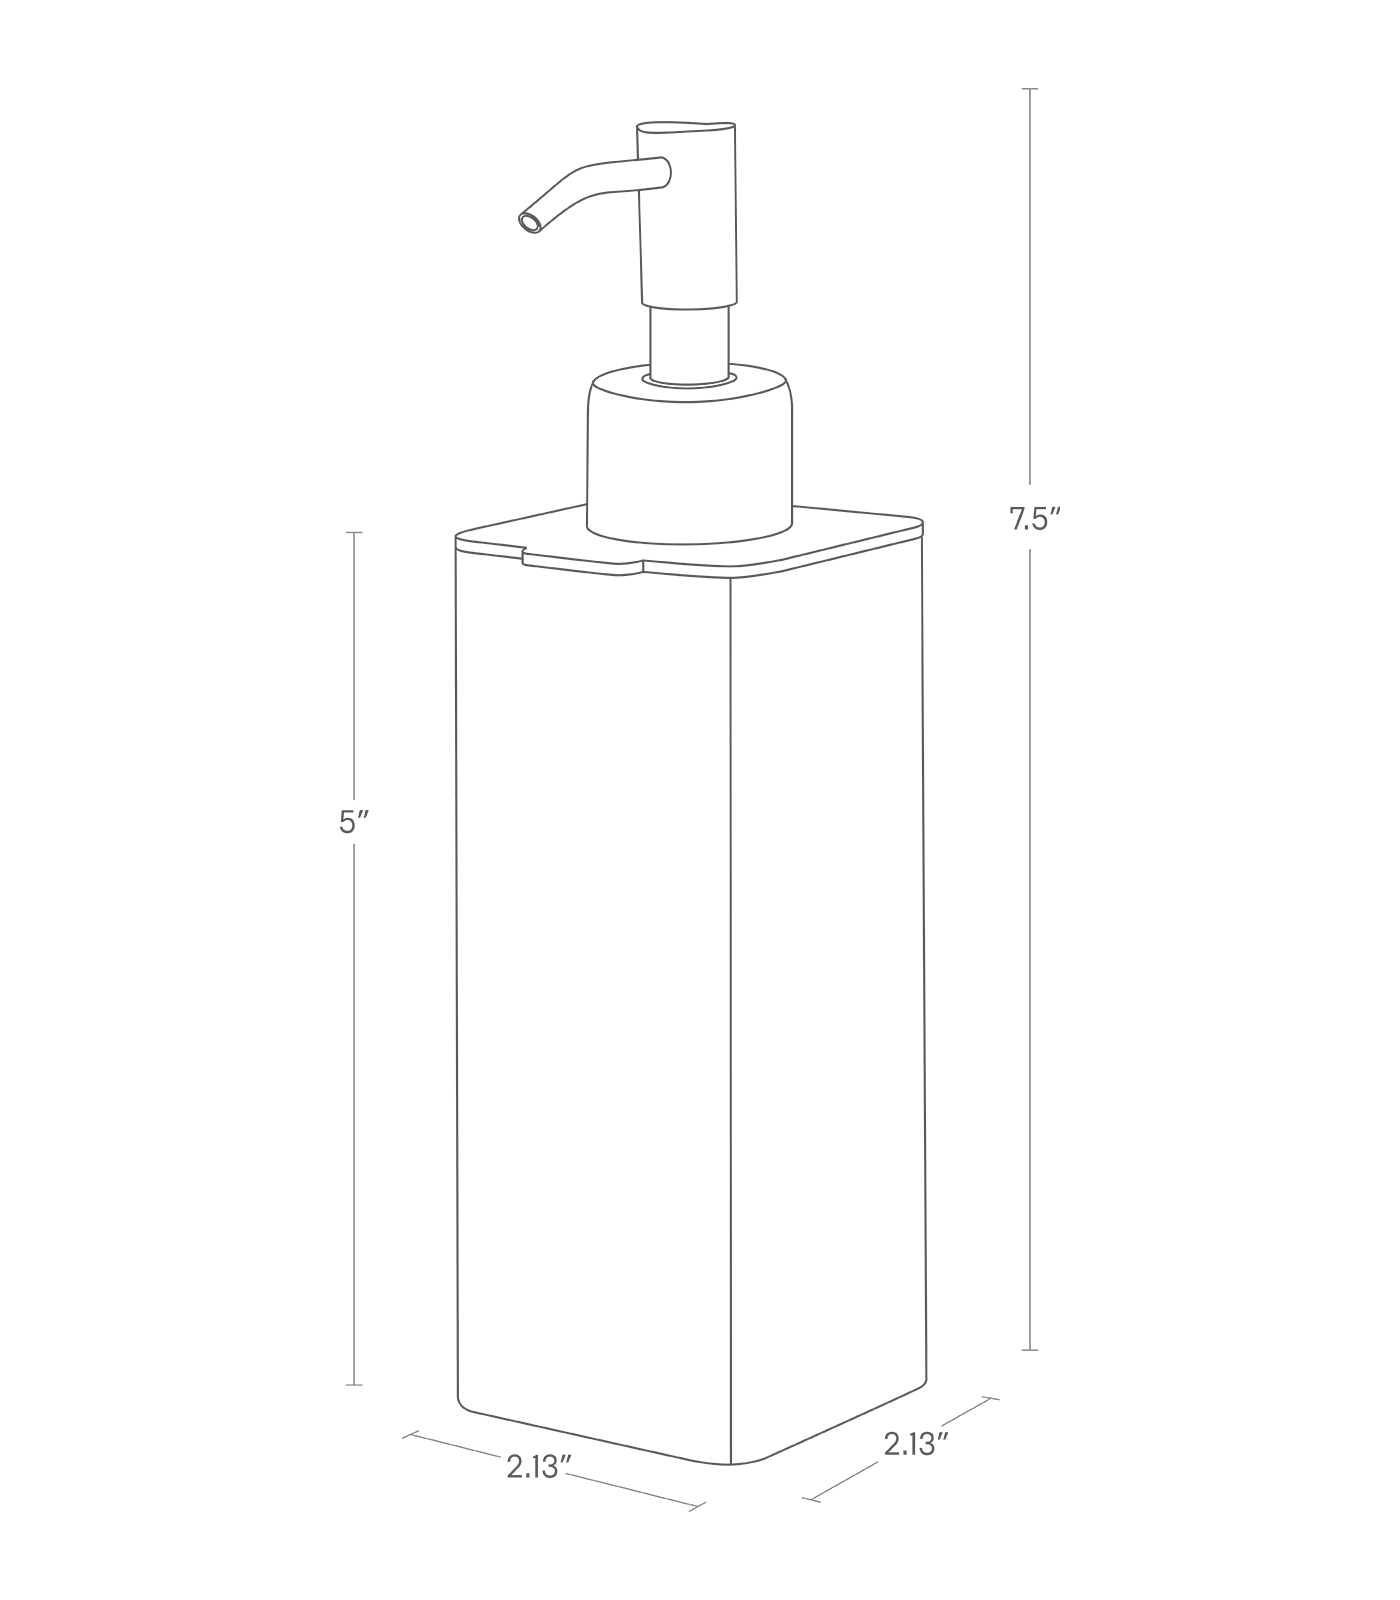 Dimension image for Hand Soap Dispenser on a white background including dimensions  L 2.76 x W 2.17 x H 7.68 inches